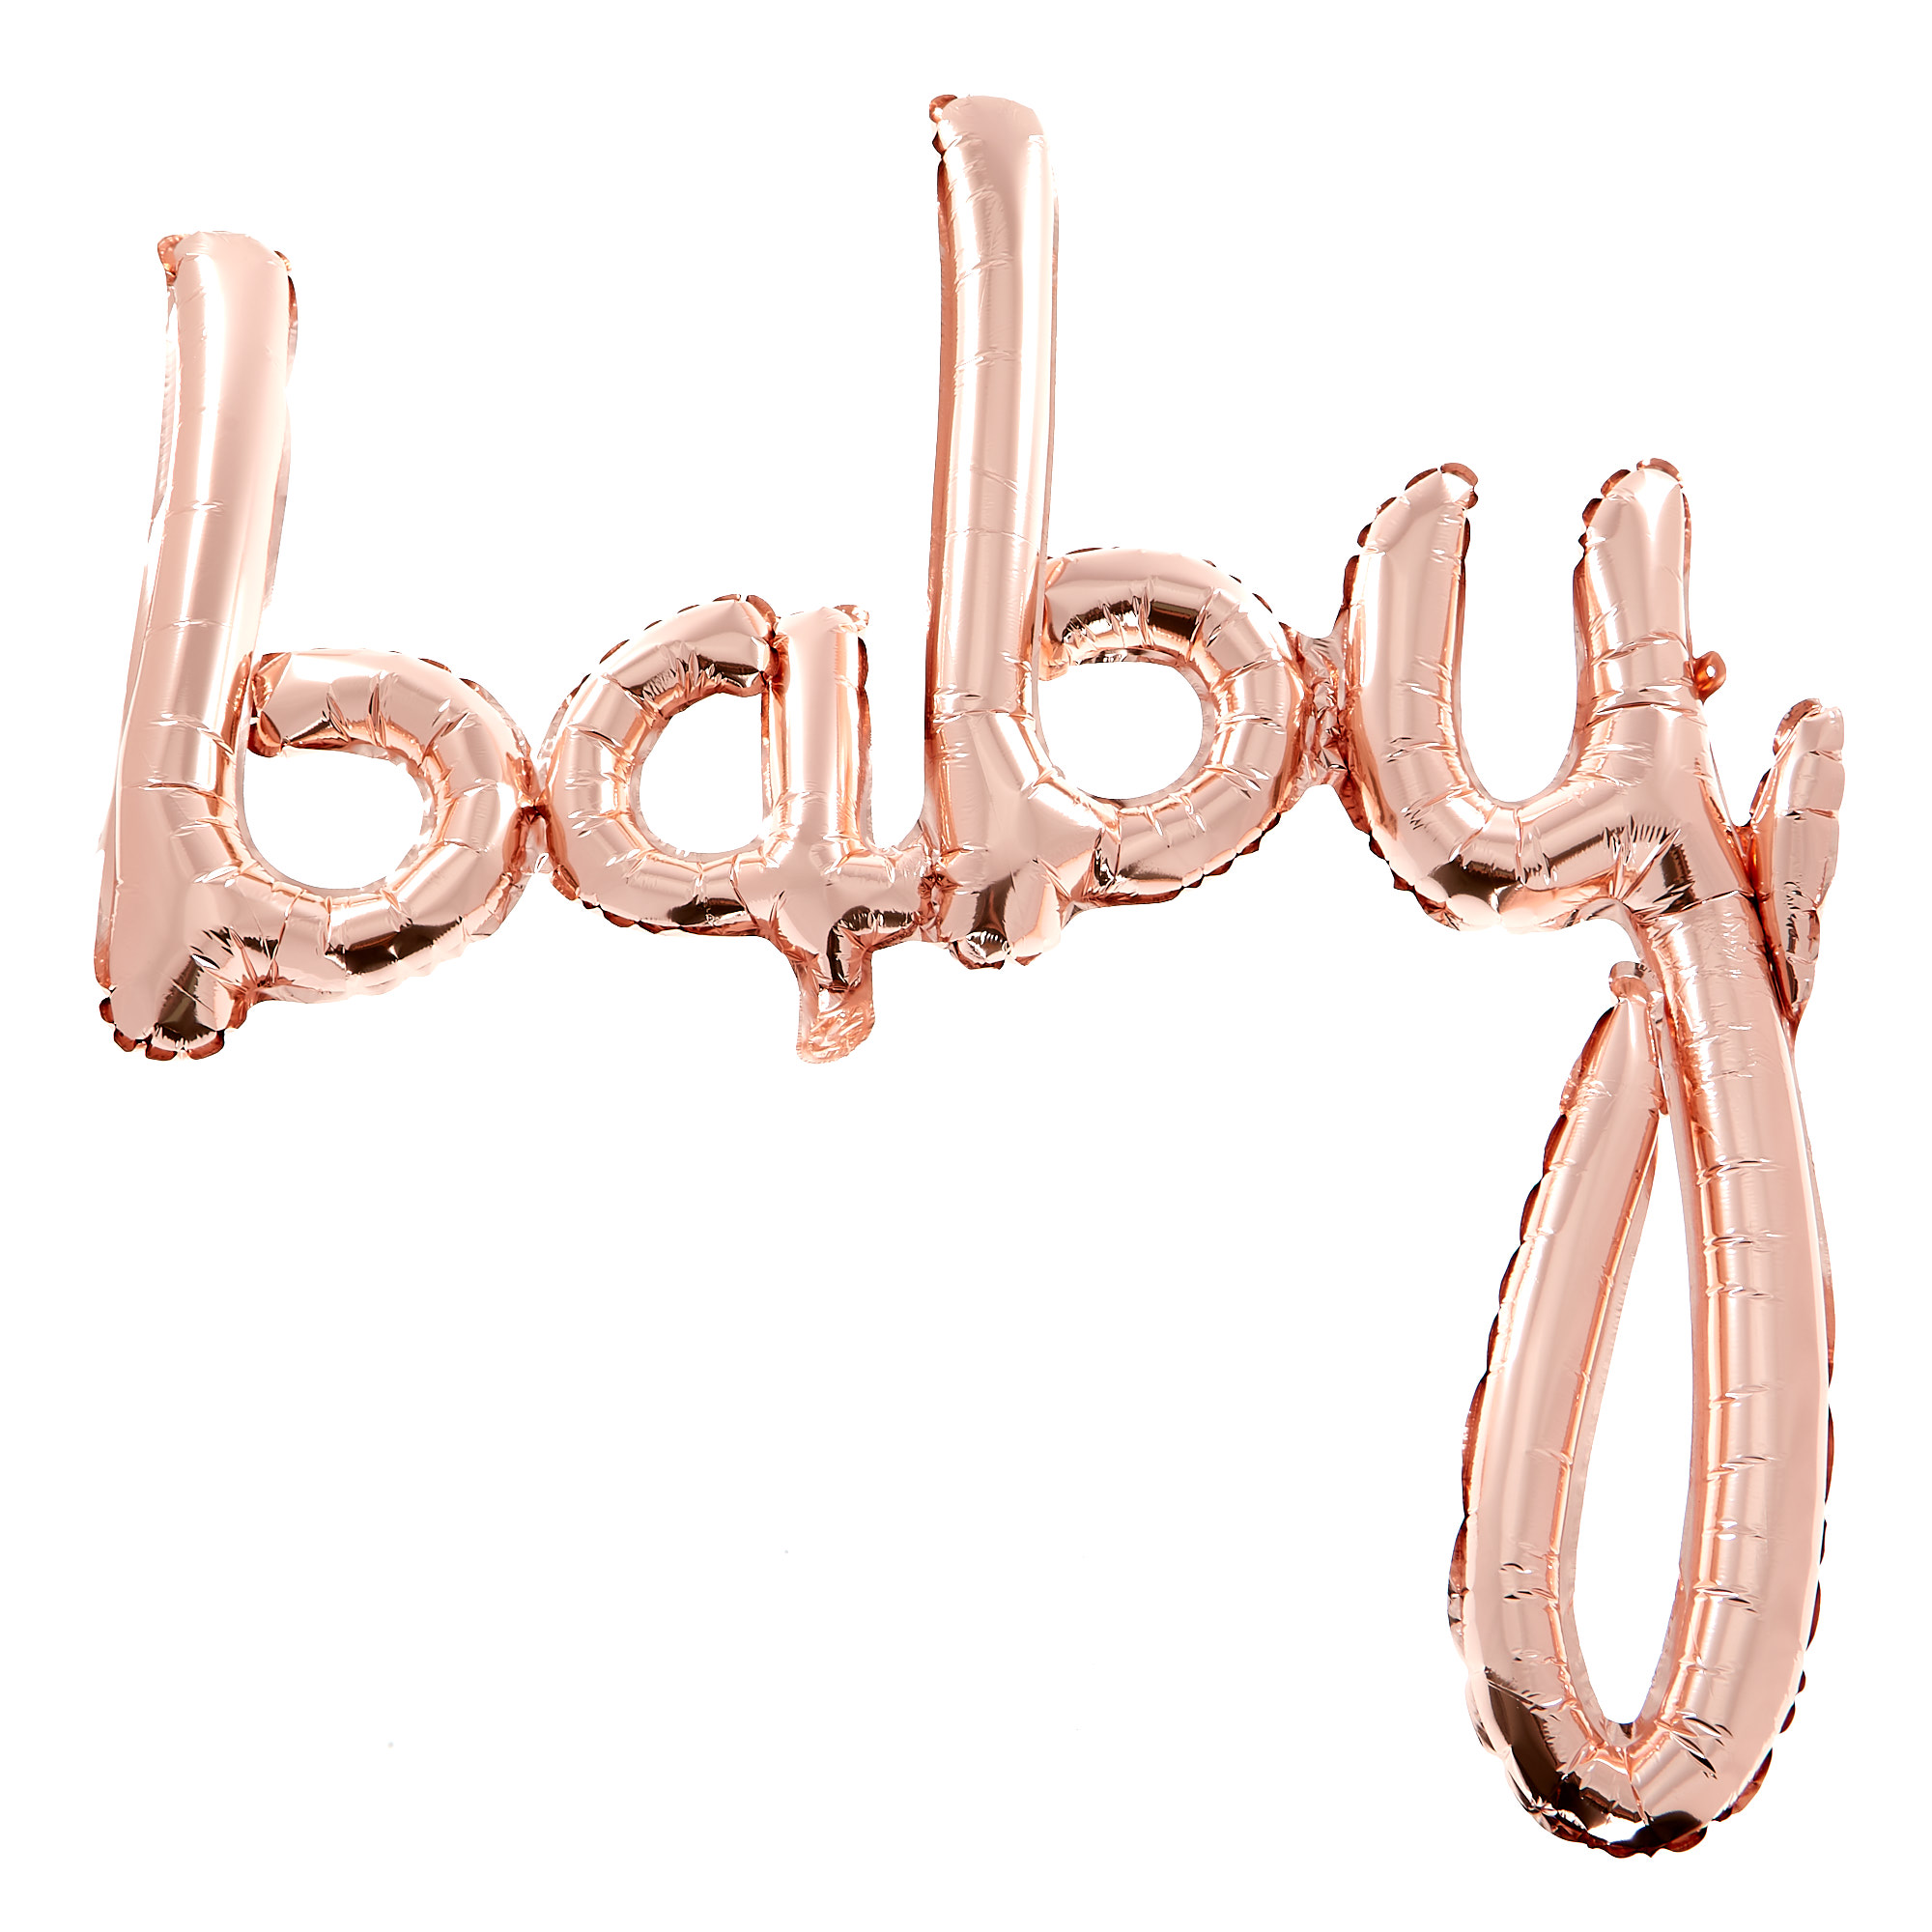 Rose Gold Baby Shower Party Tableware & Decorations Bundle - 16 Guests